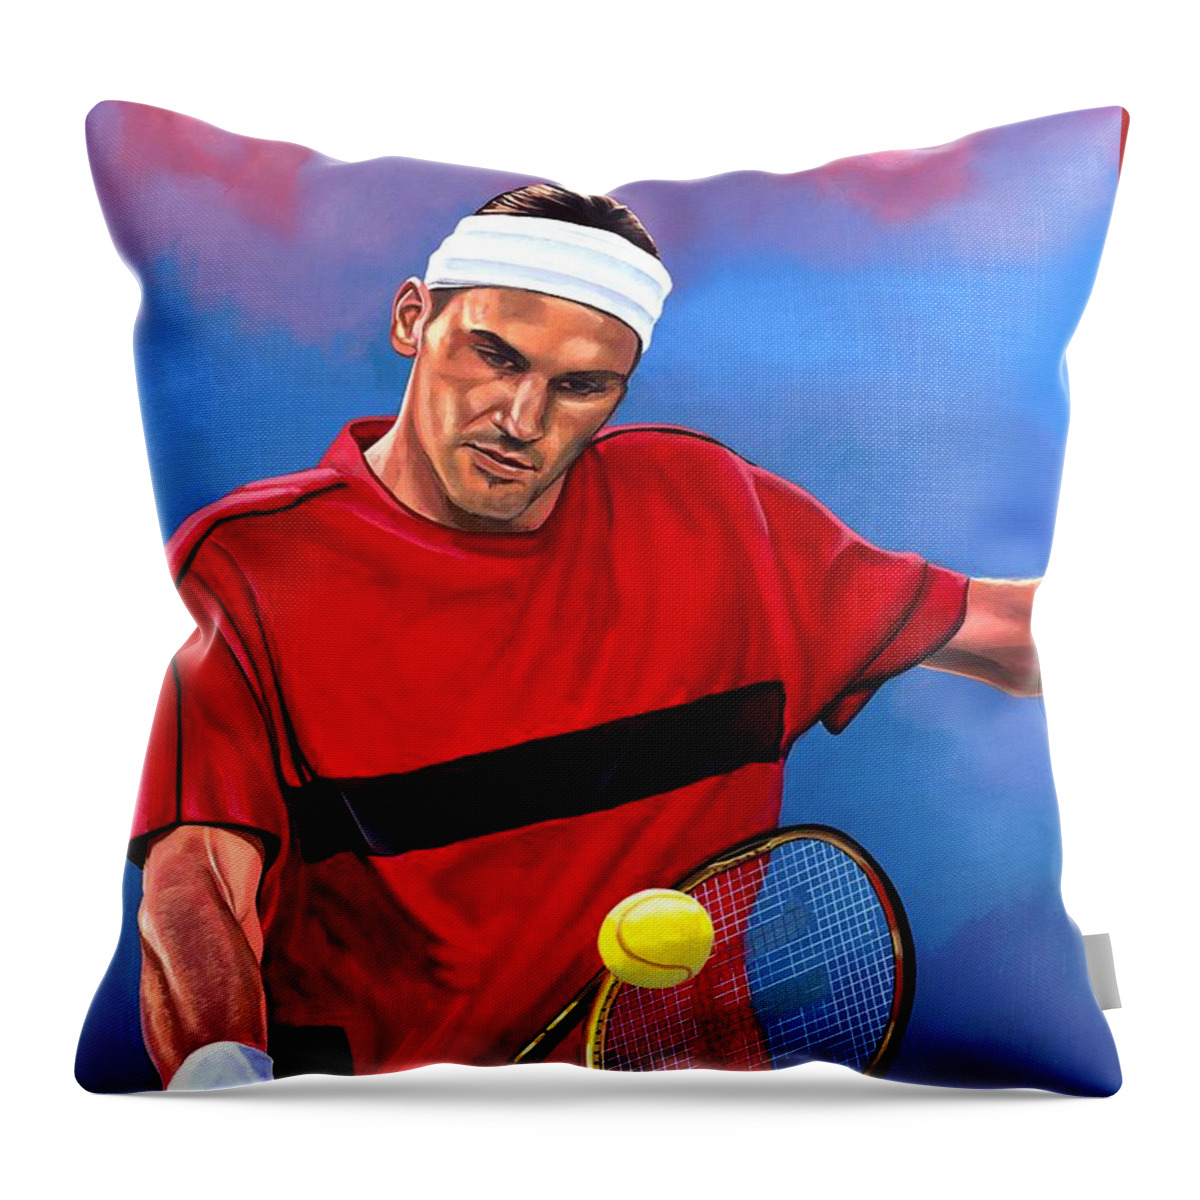 Roger Federer Throw Pillow featuring the painting Roger Federer The Swiss Maestro by Paul Meijering